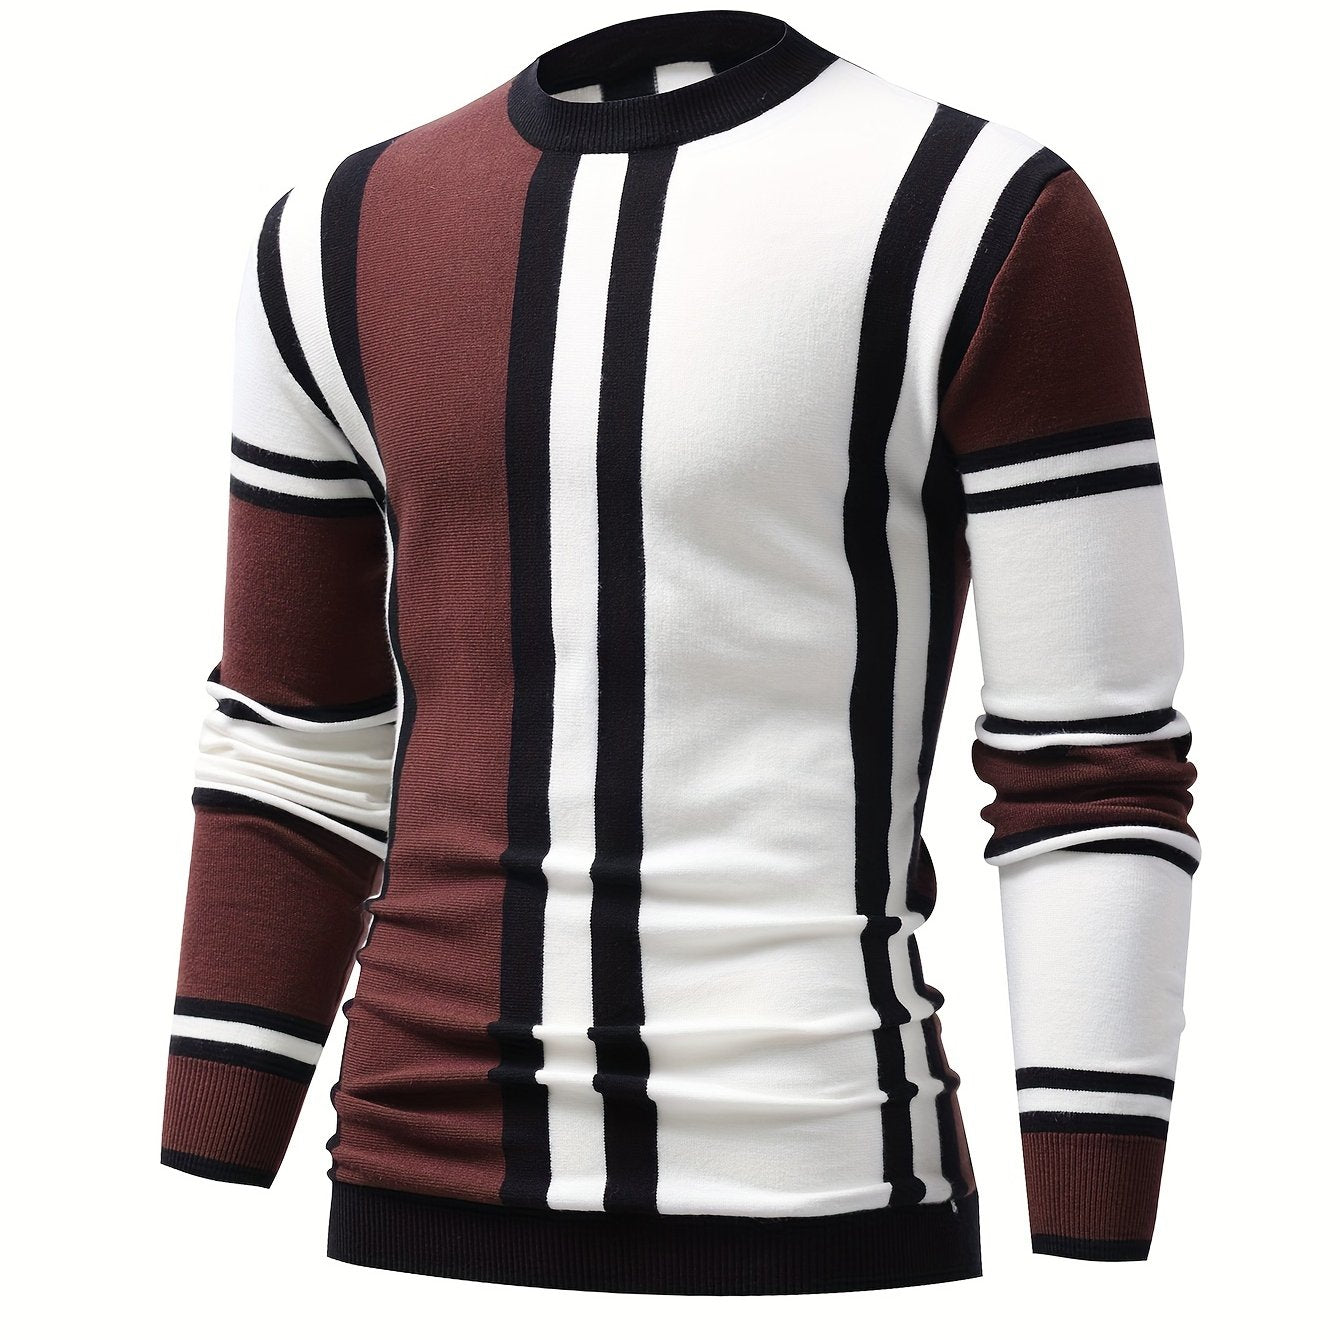 Foruwish - Color Block Design Chic Sweater, Men's Casual Warm High Stretch Crew Neck Pullover Sweater For Fall Winter